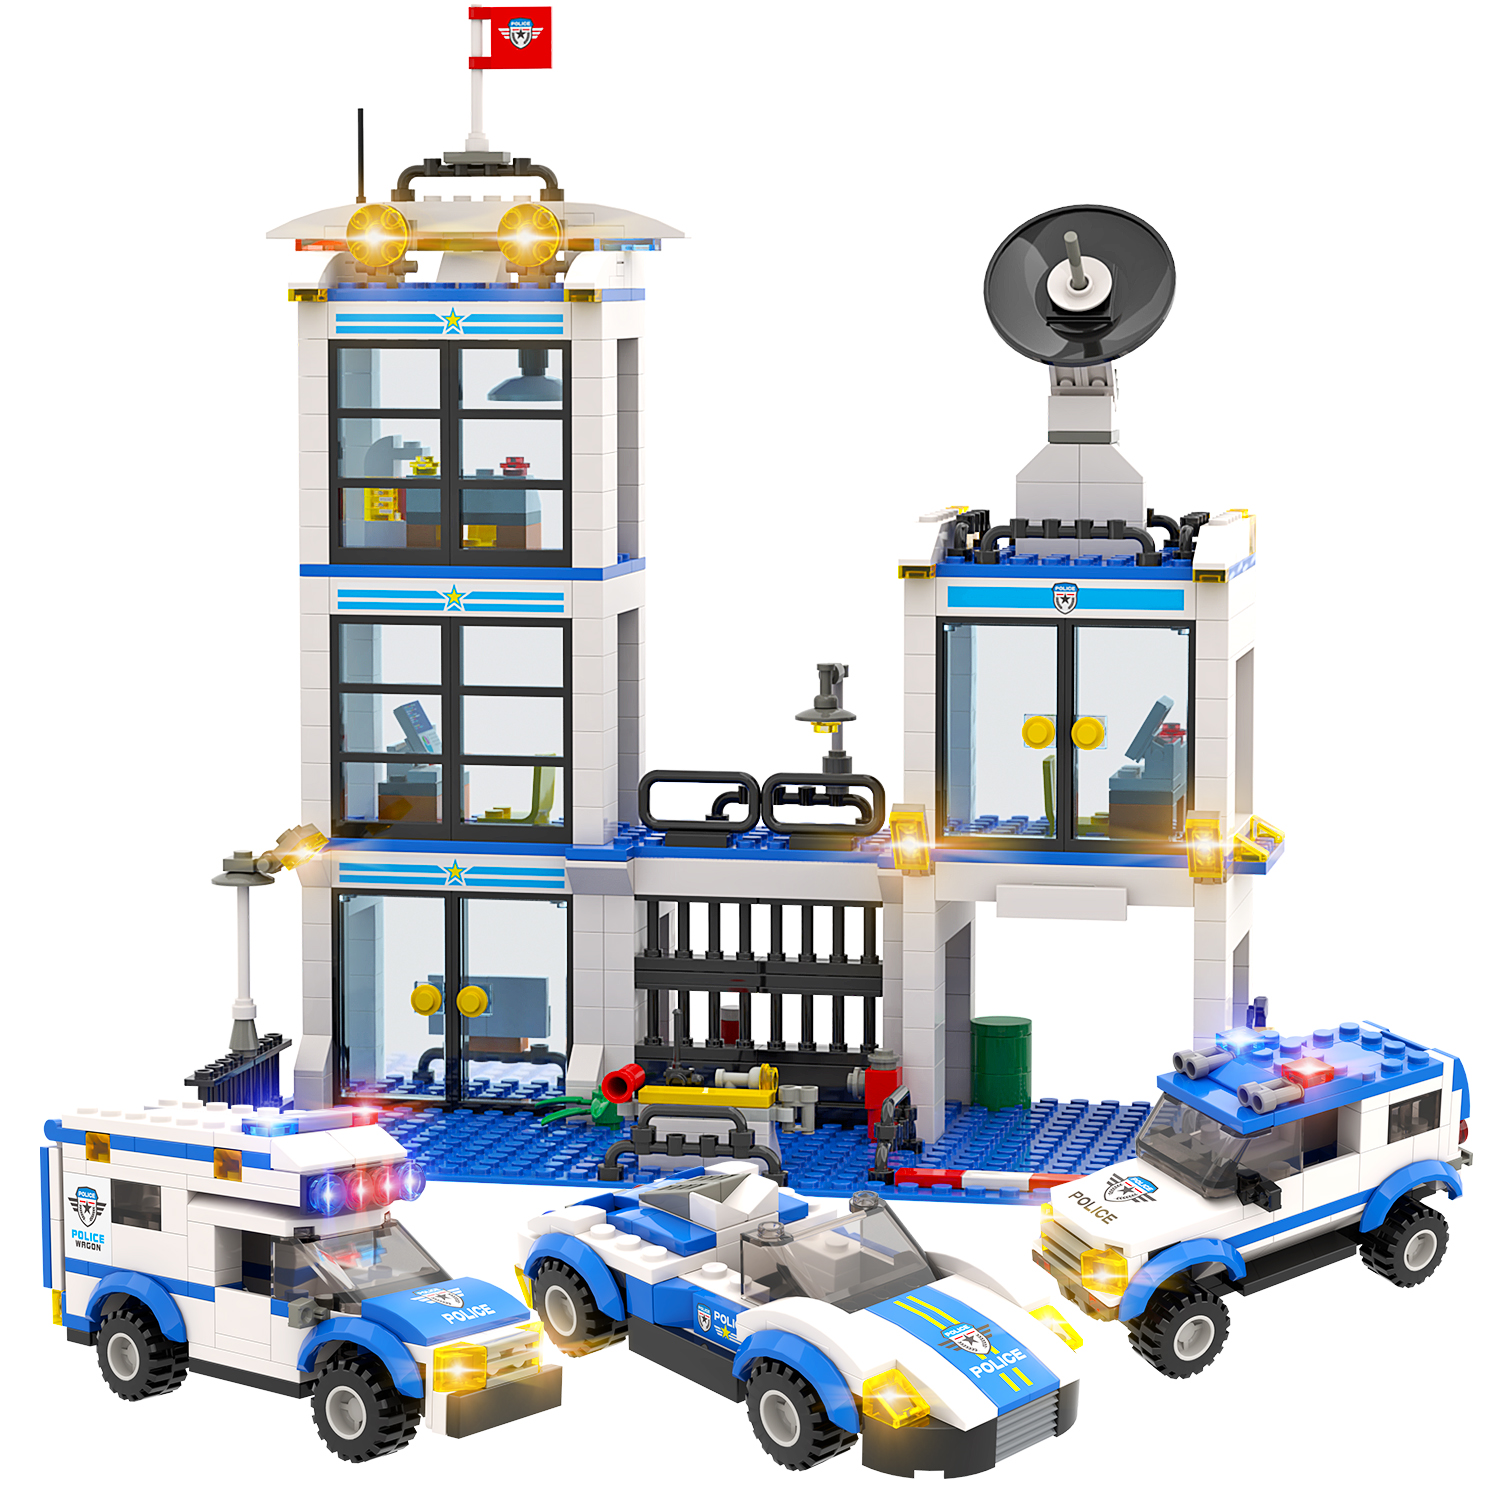 LEGO 60141 "Police Station" Building Toy 